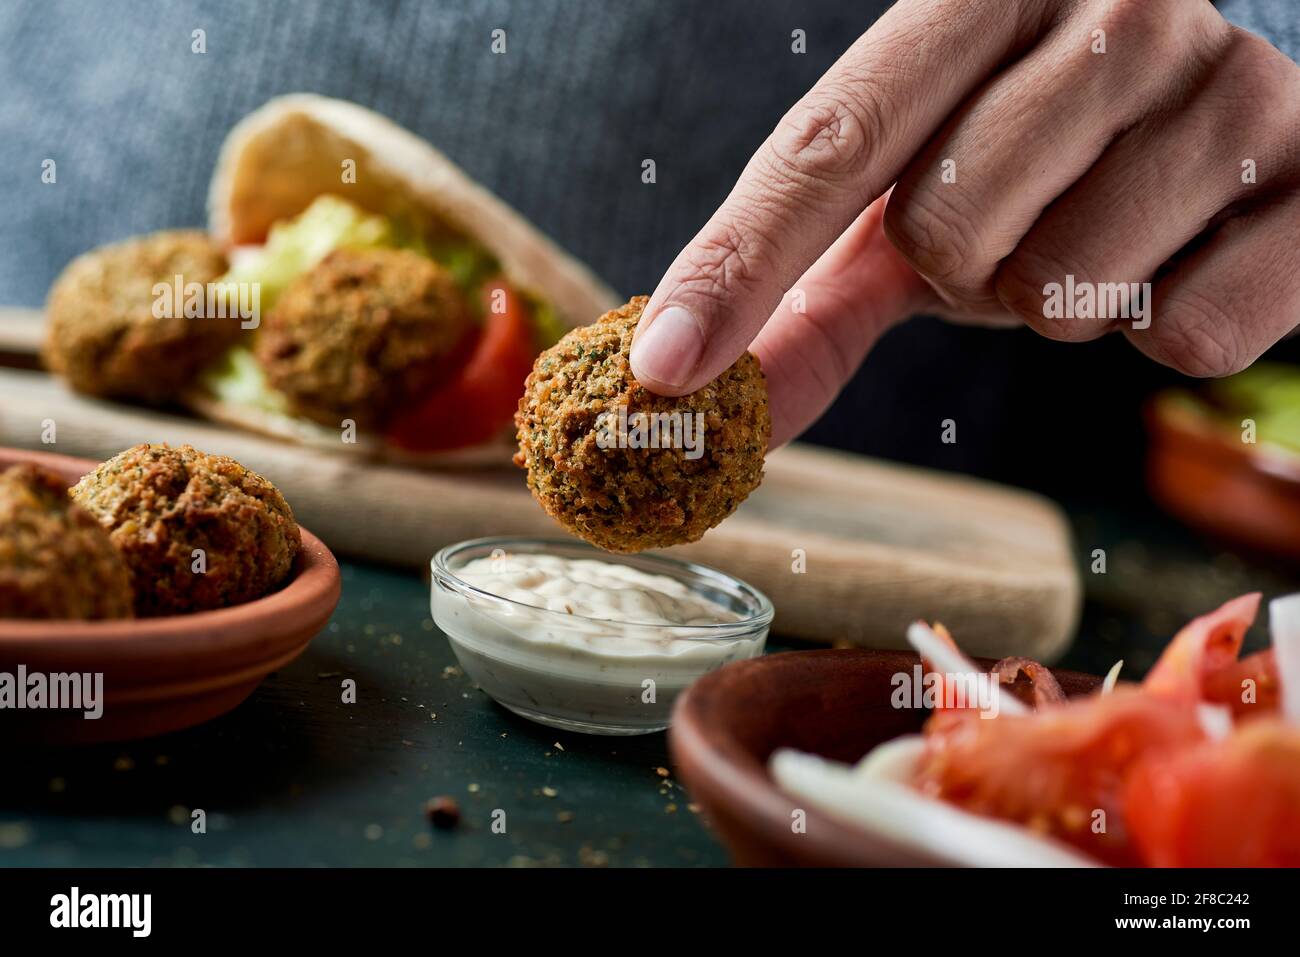 closeup of a young man dipping a falafel in a bowl of yogurt sauce sitting at a rustic green wooden table Stock Photo